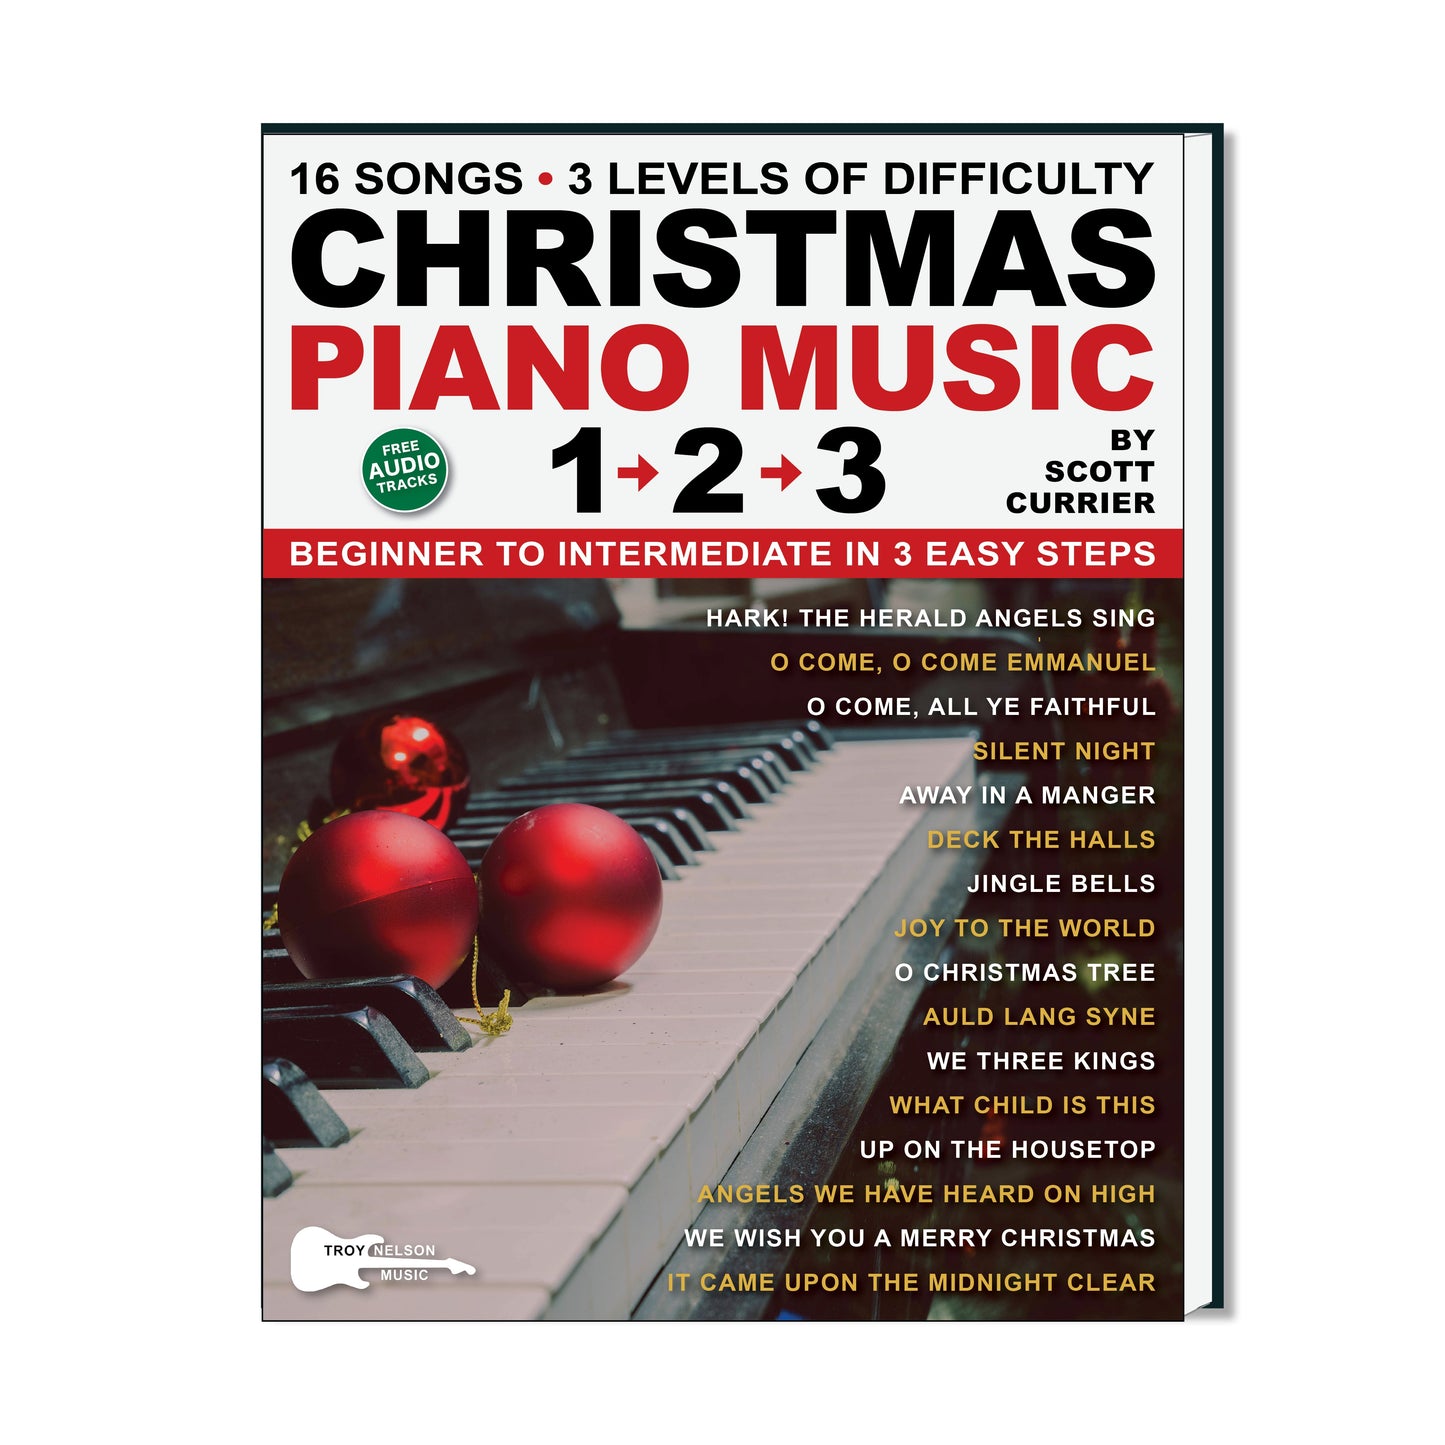 Image of a Piano on a Book Cover with Christmas Decorations